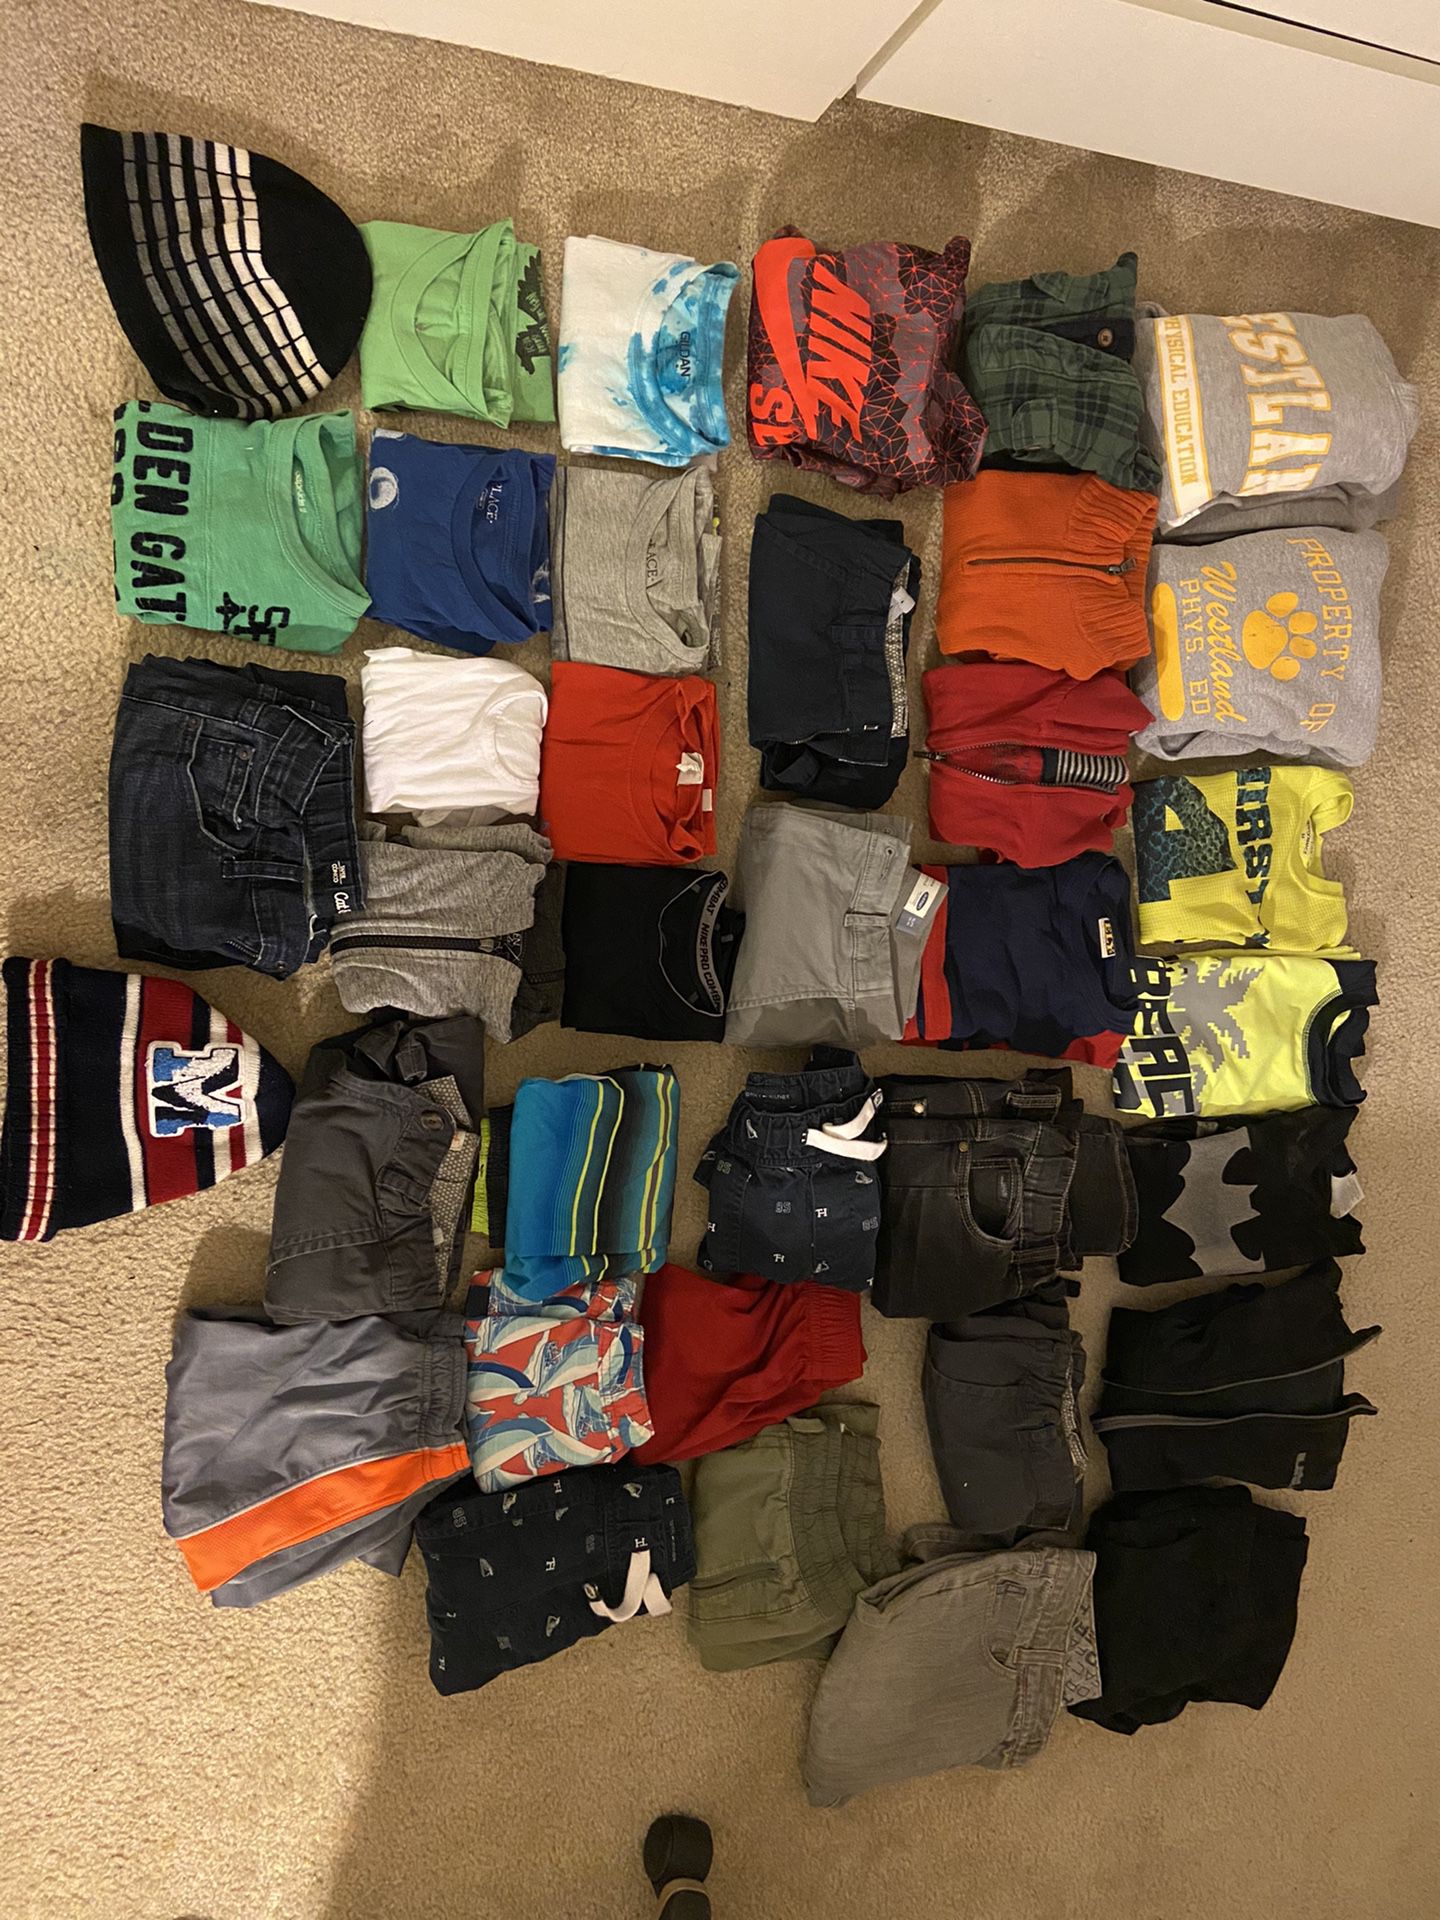 Boys clothes youth size M and L, 45 pieces